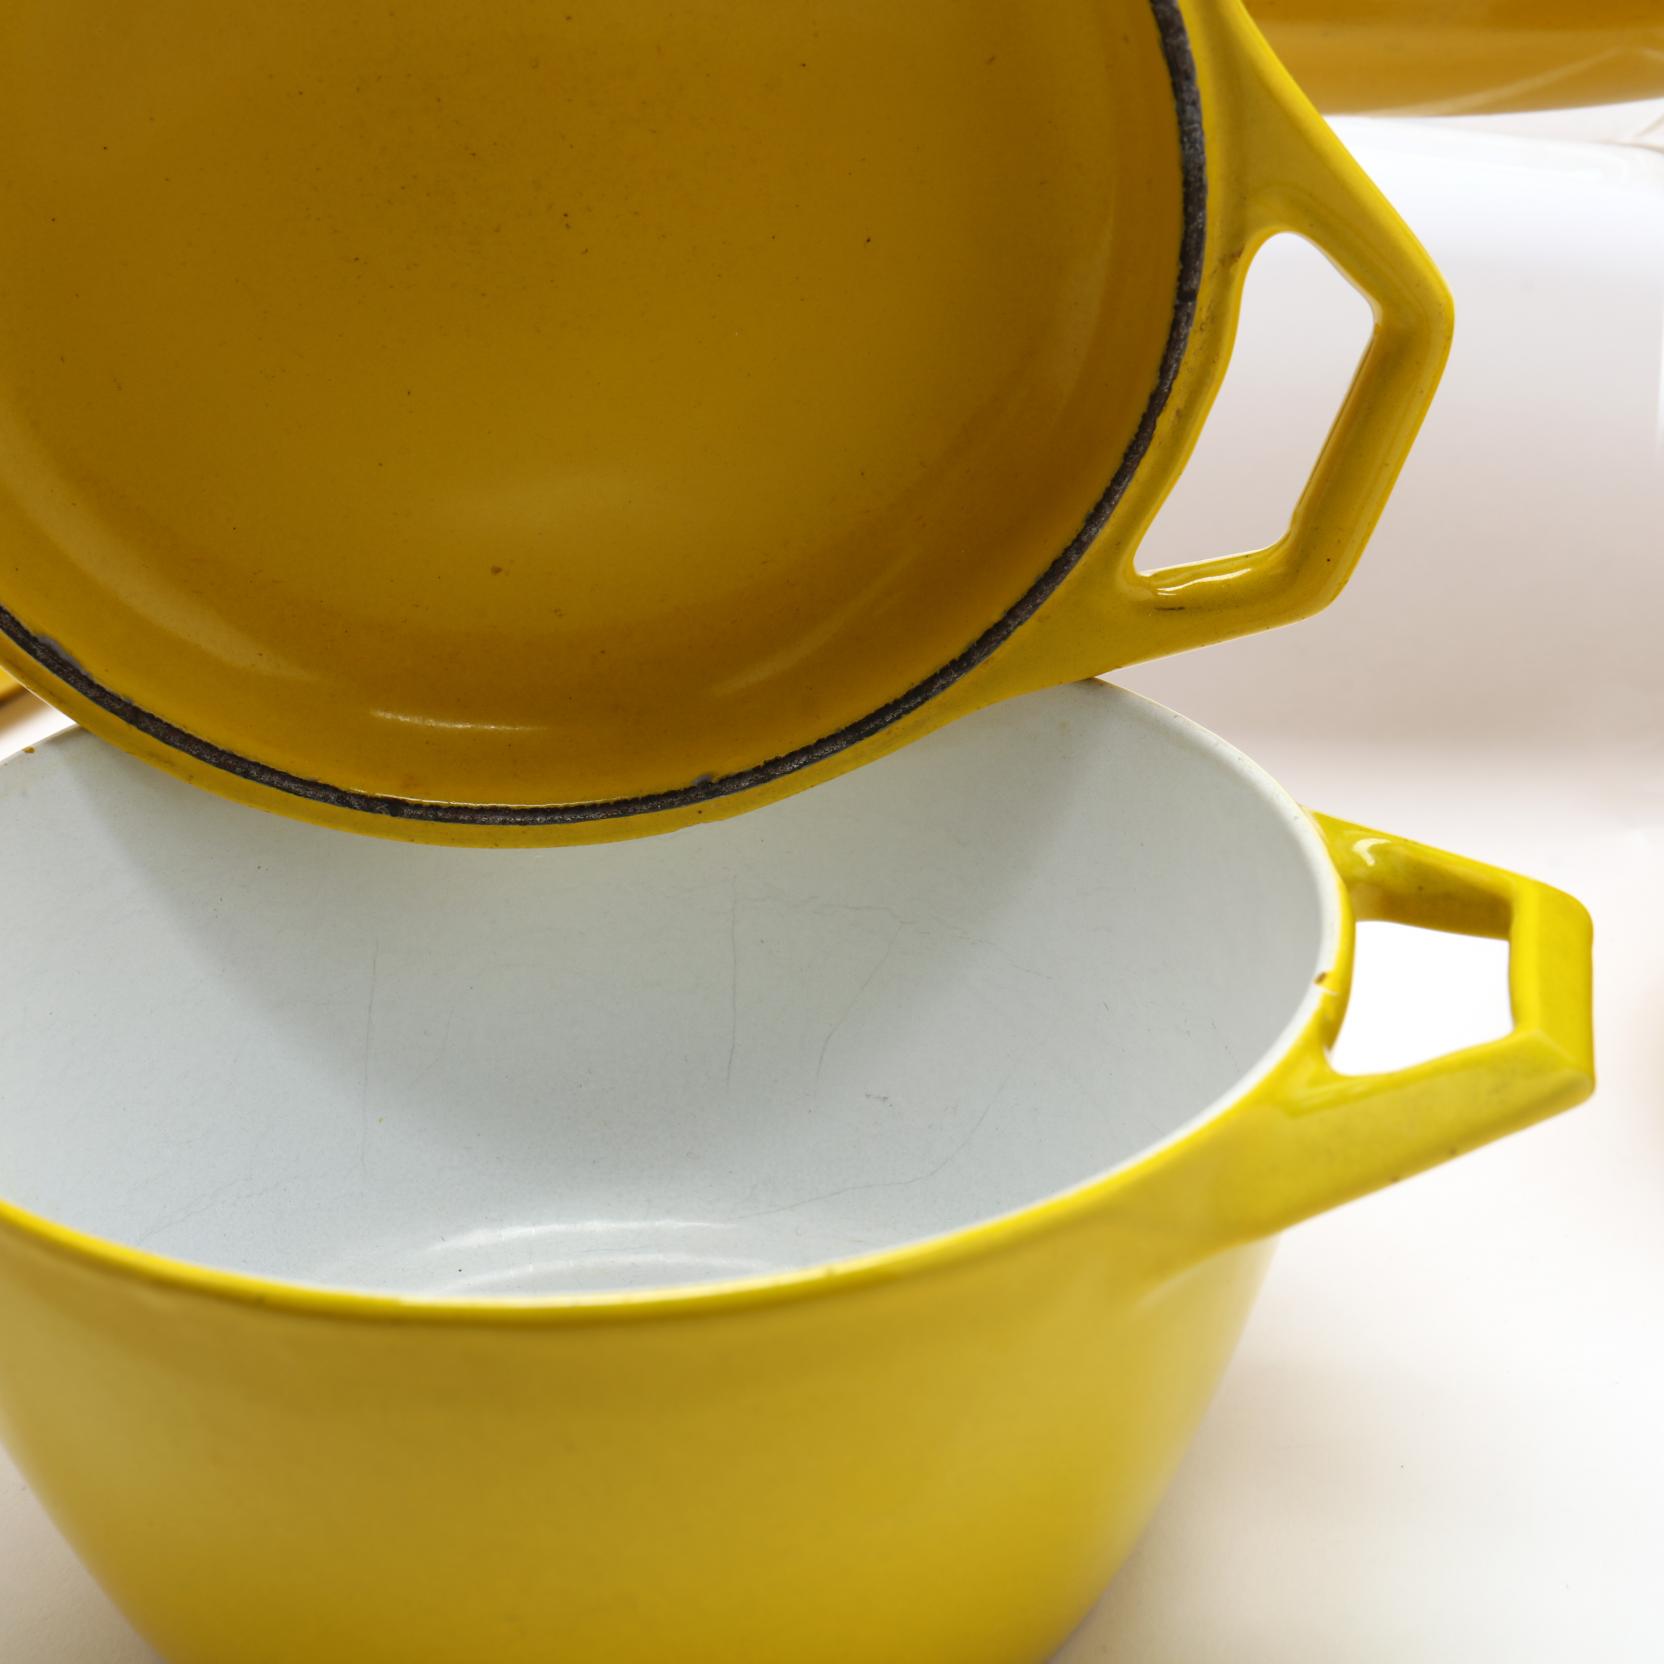 Copco Danish Modern Cast Iron Yellow Enamel Cookware for Sale in